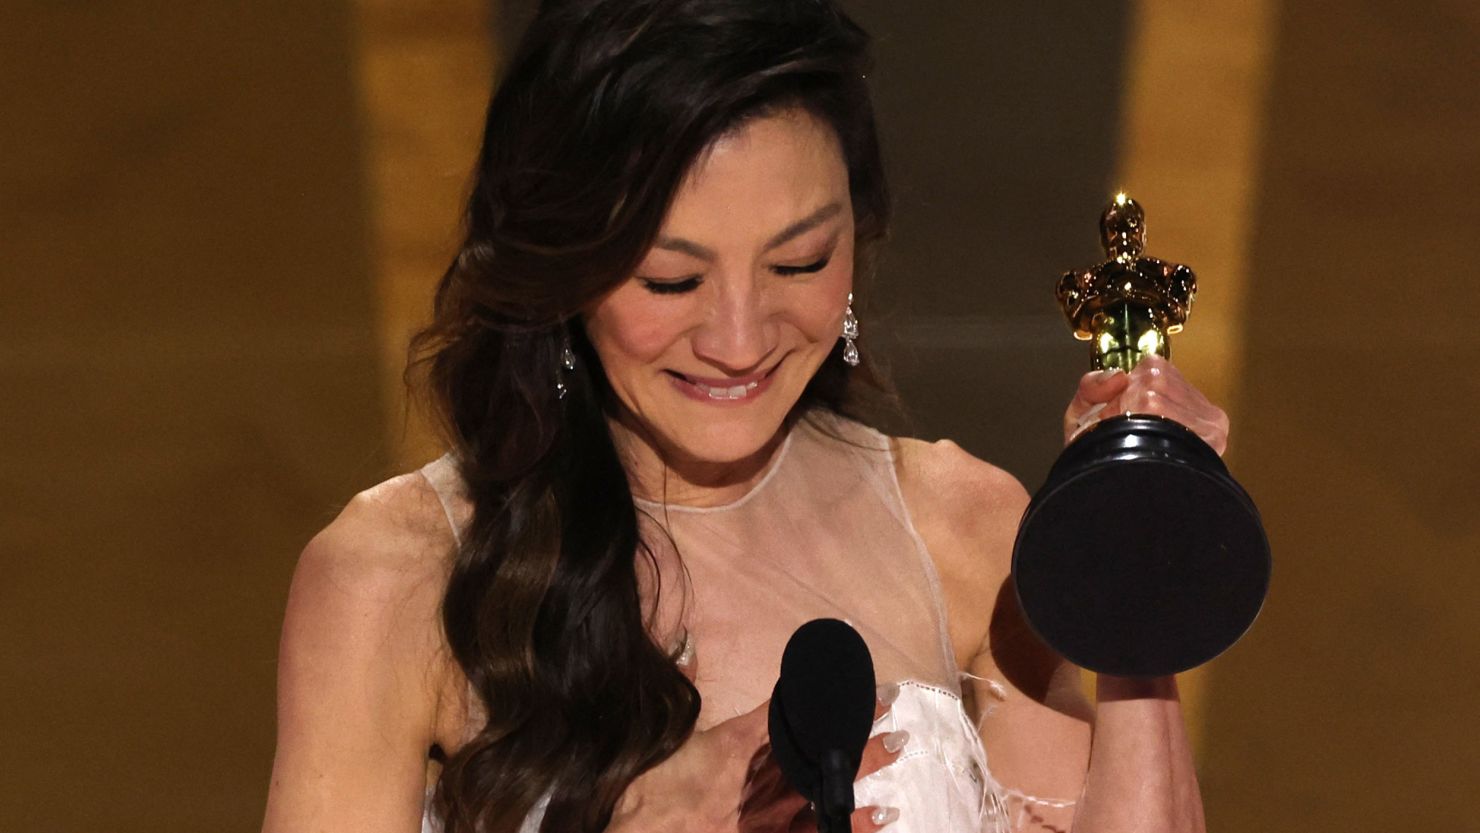 Michelle Yeoh accepts the Oscar for Best Actress for "Everything Everywhere All at Once" during the Oscars show at the 95th Academy Awards.